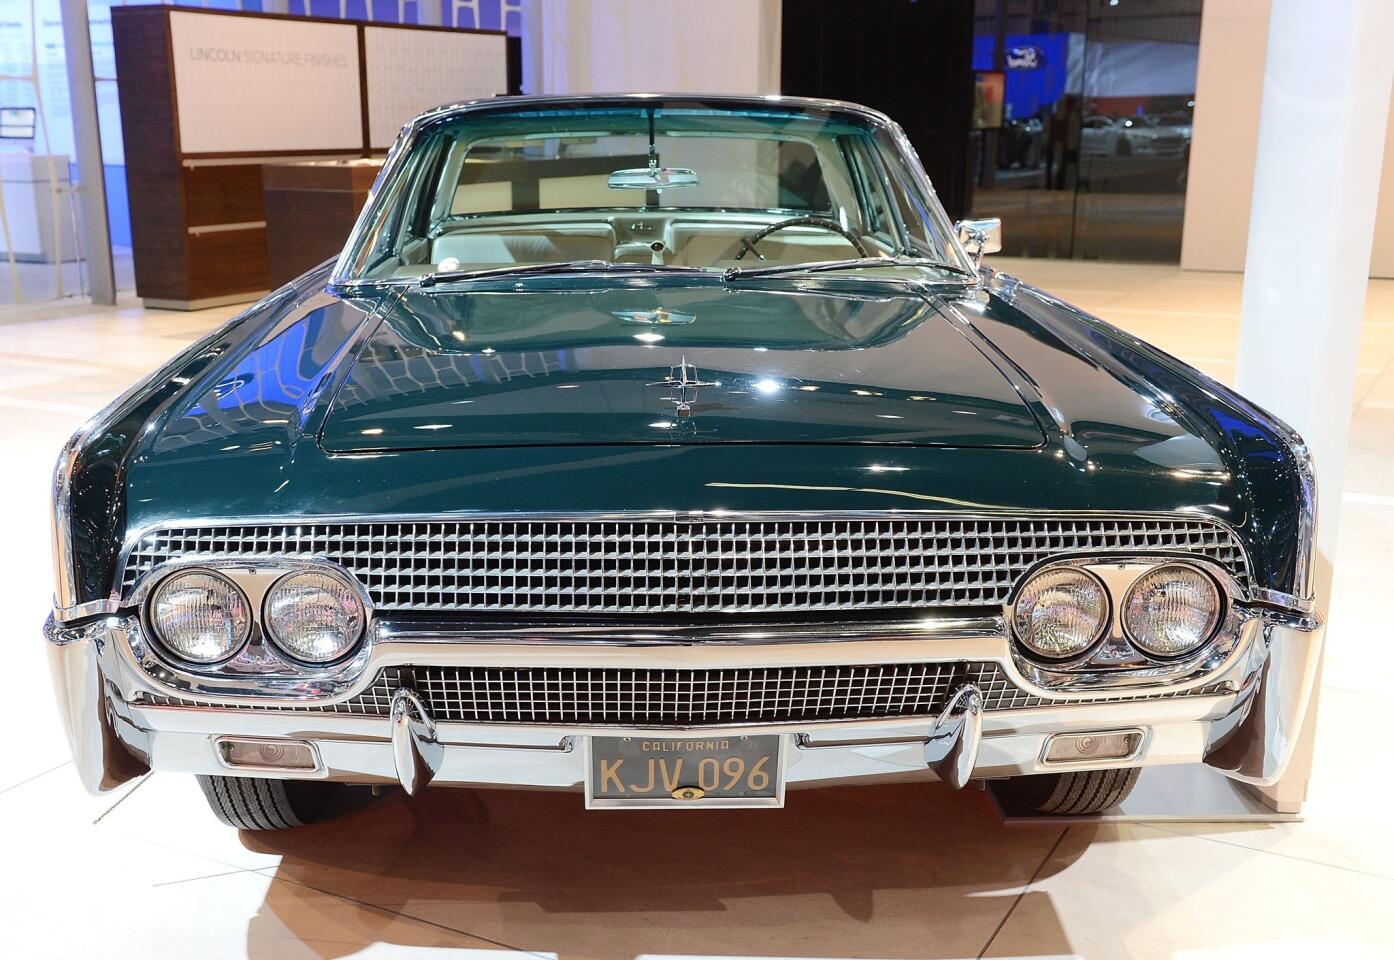 Lincoln had little in the way of new models to show off at the 2012 L.A. Auto Show, so it displayed restored classics such as this 1961 Continental sedan.